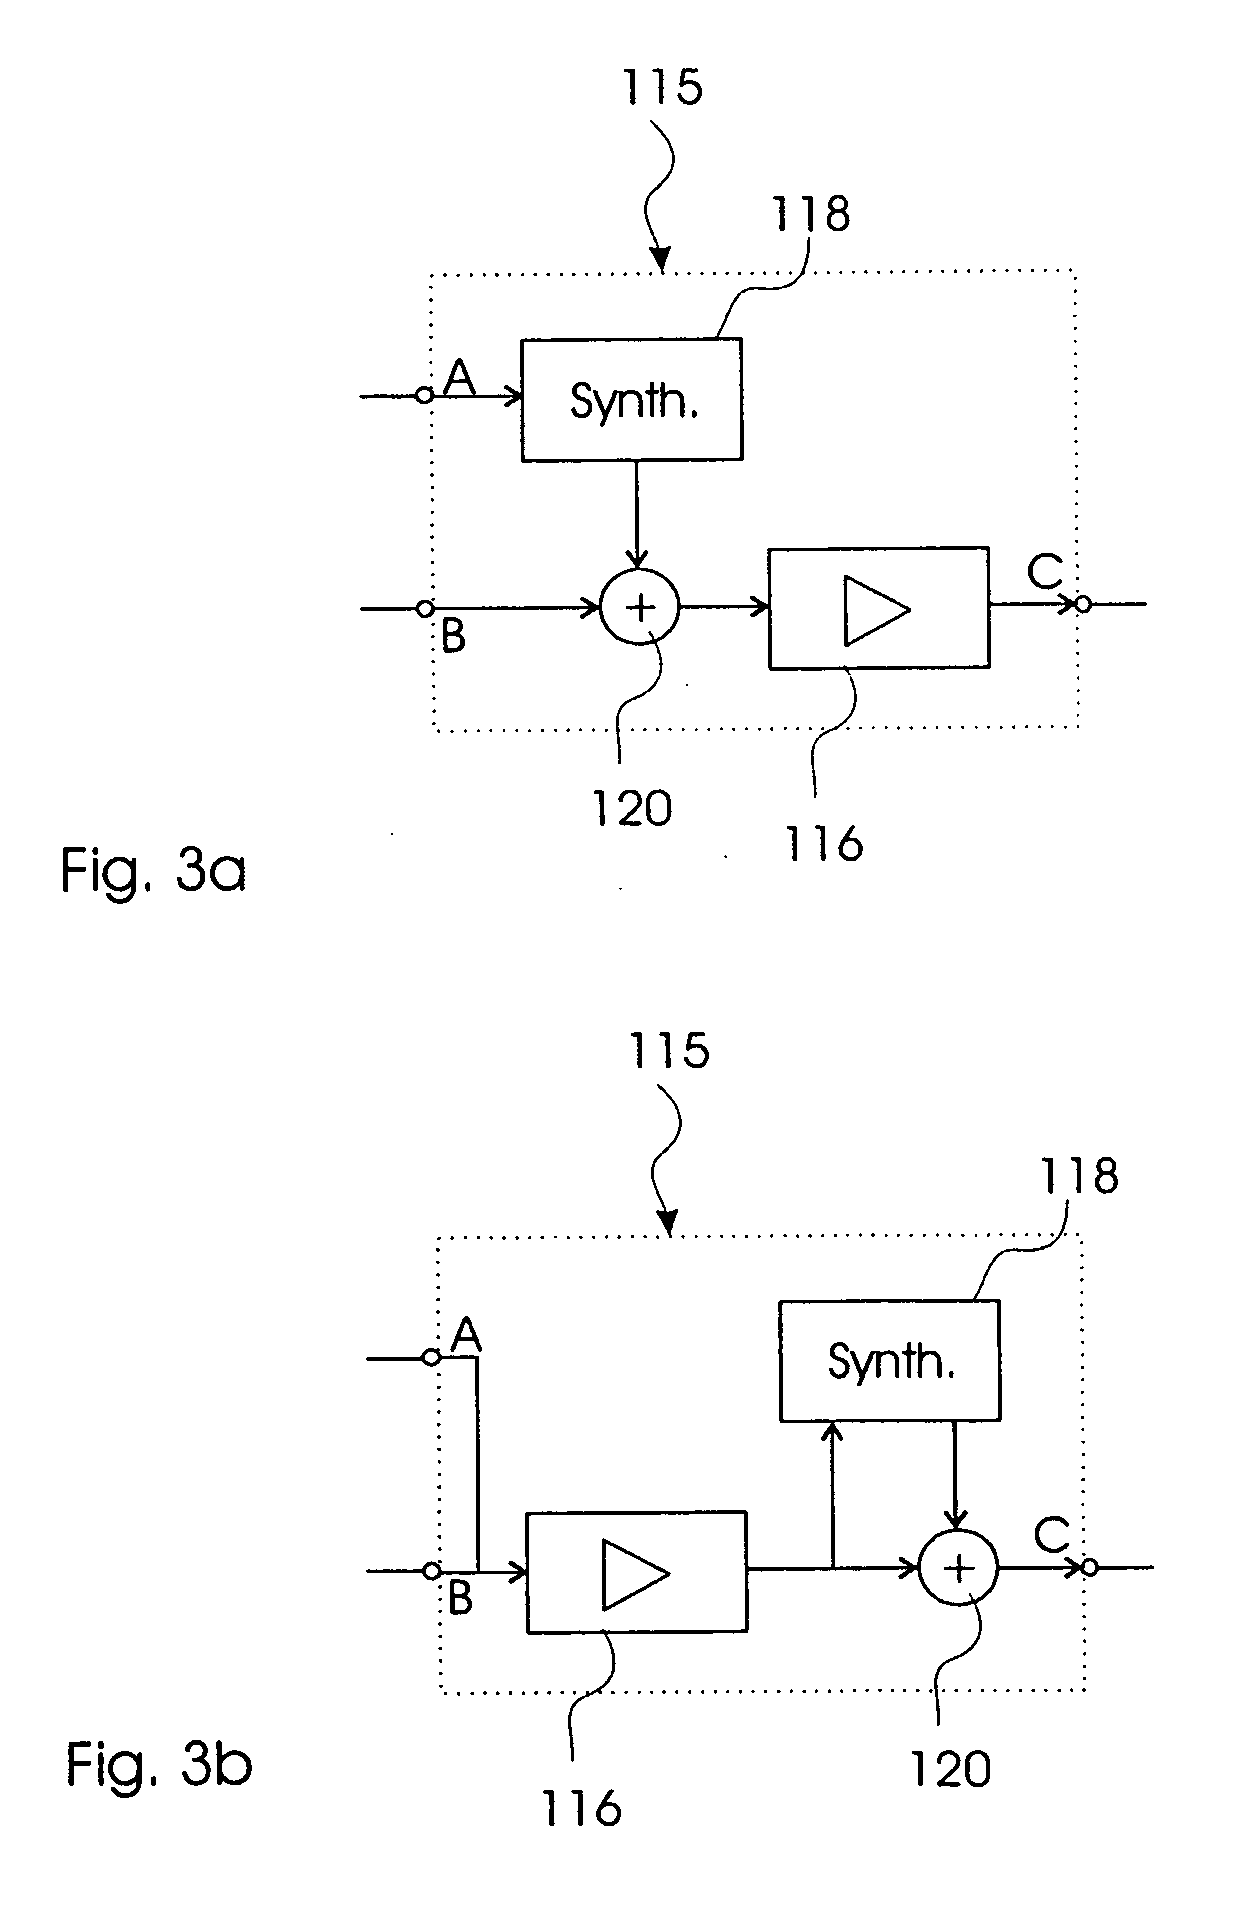 System and Method for Eliminating Feedback and Noise In a Hearing Device